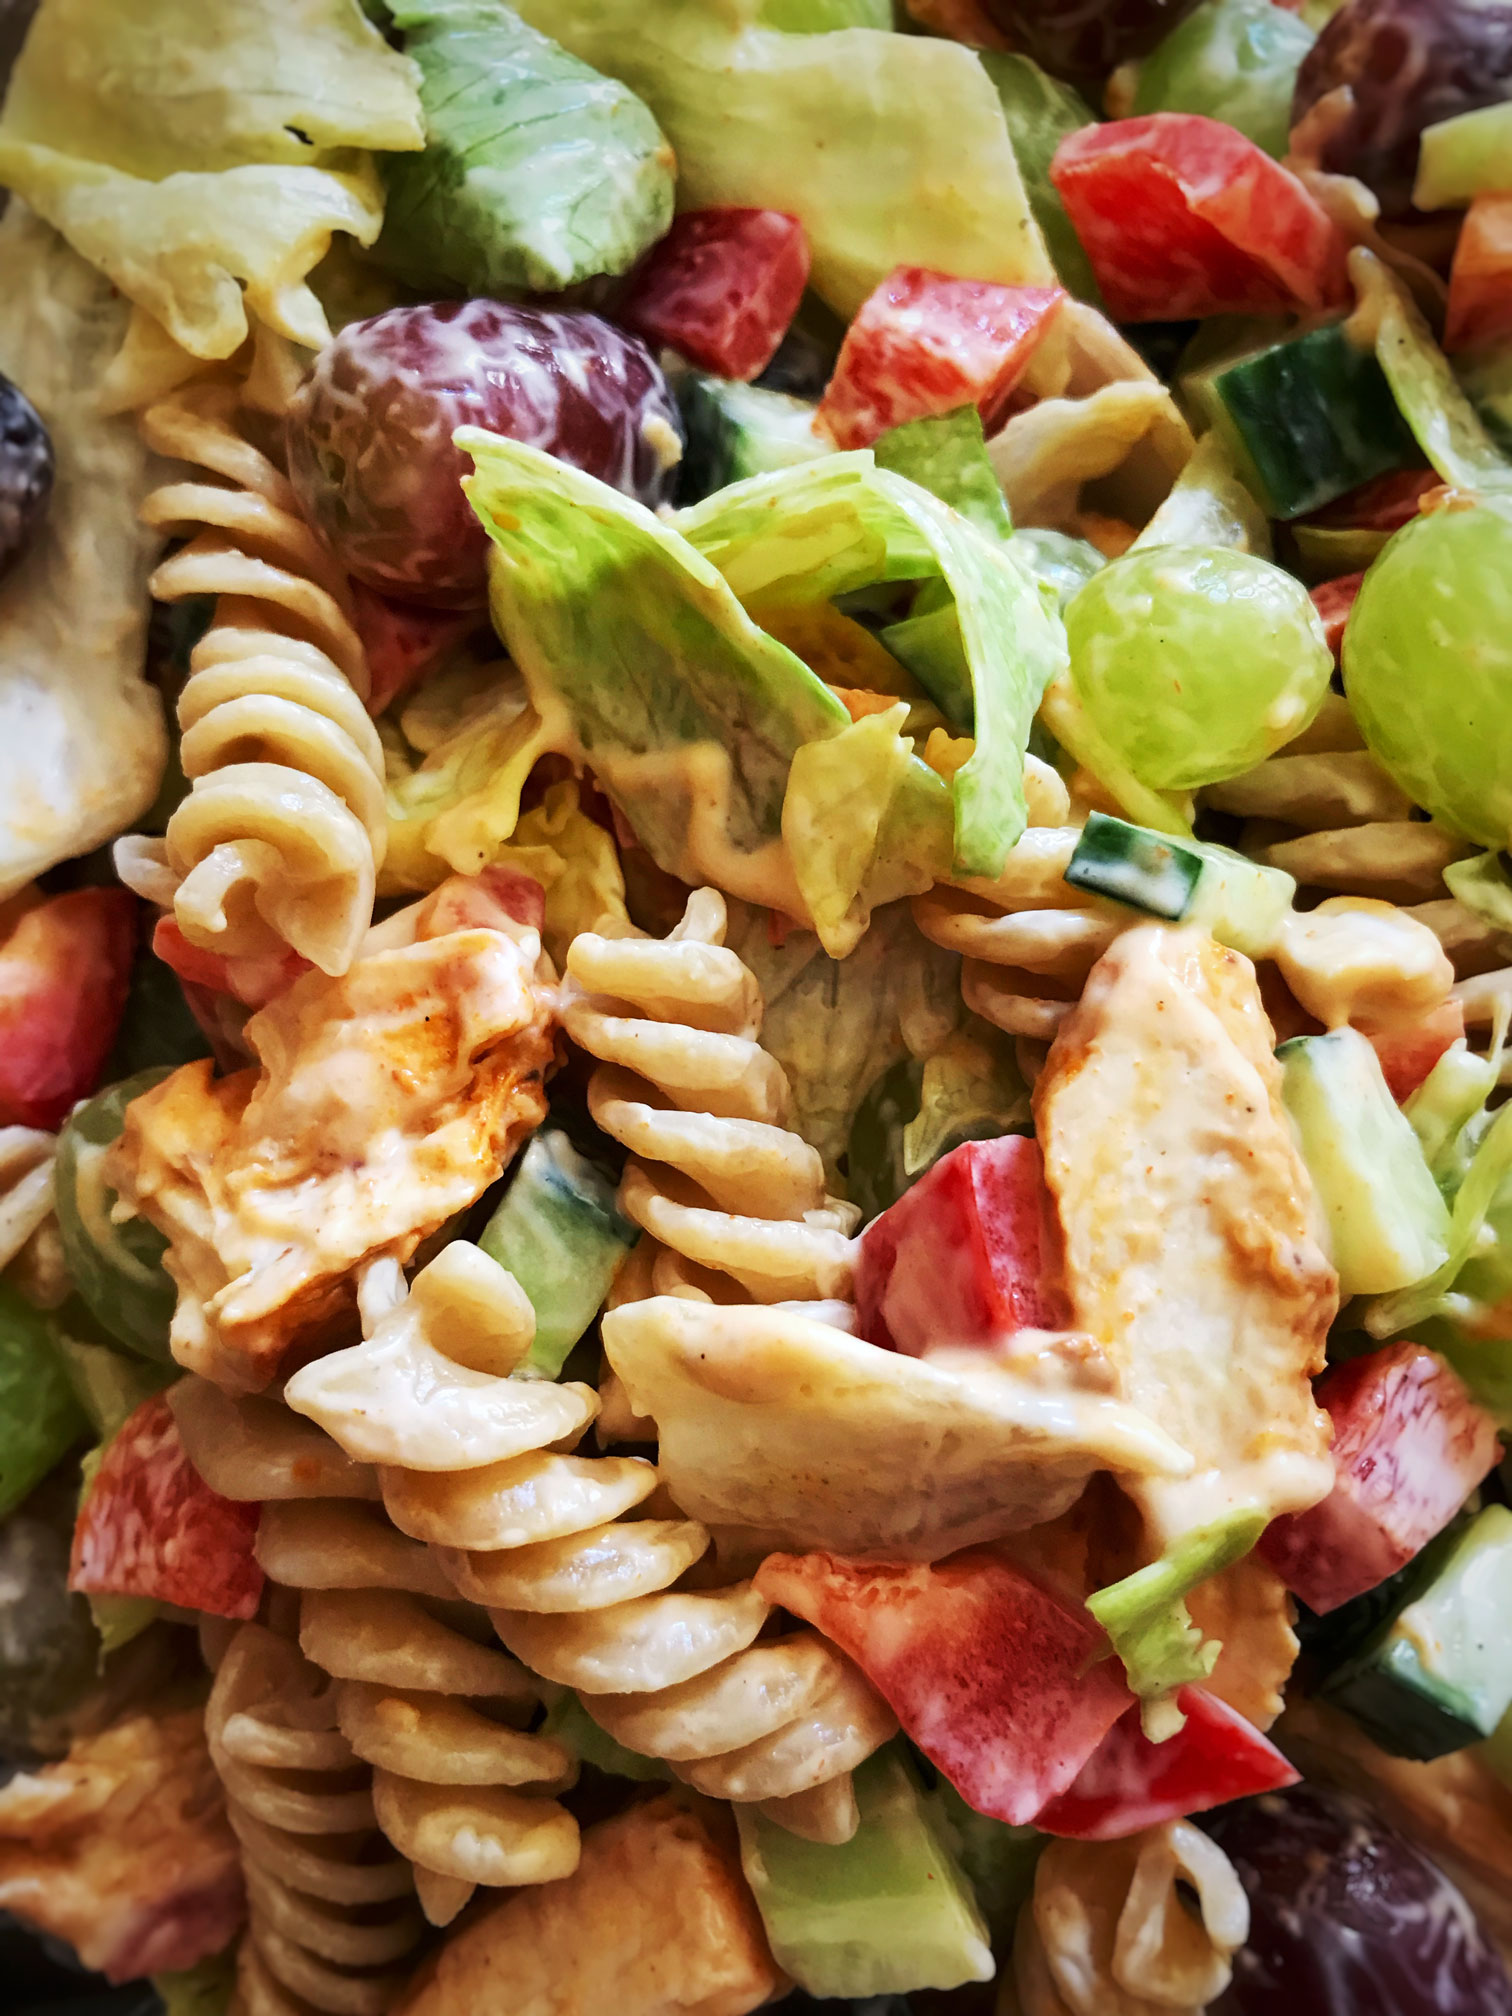 Indian spiced chicken and pasta salad